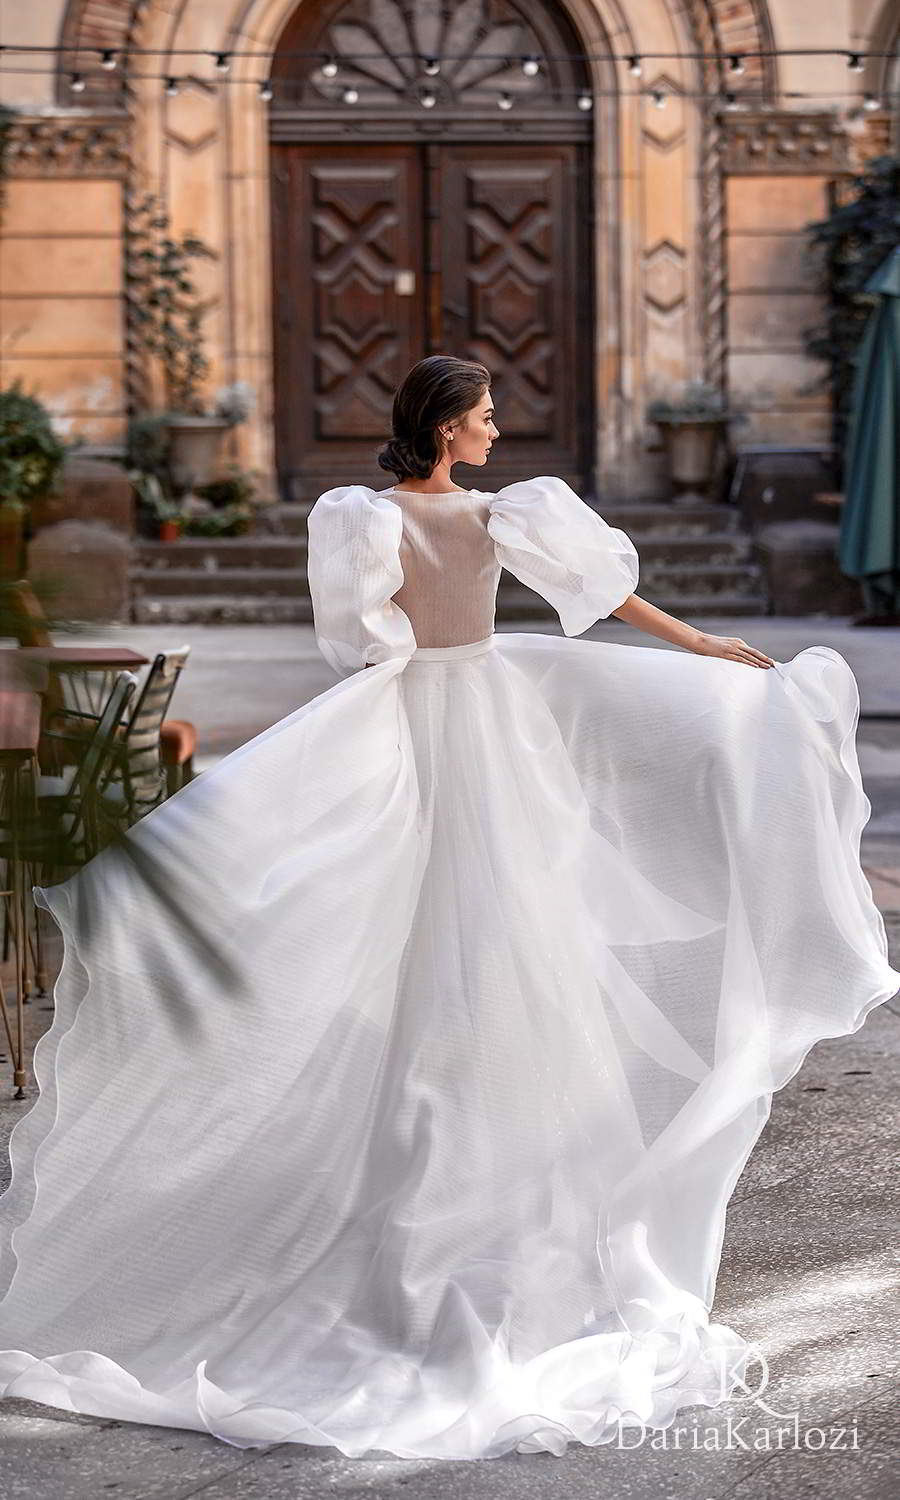 daria karlozi 2021 graceful dream bridal sleeveless illusion straps plunging sweetheart neckline fully embellished a line wedding dress puff sleeves coat (towards the love) bv